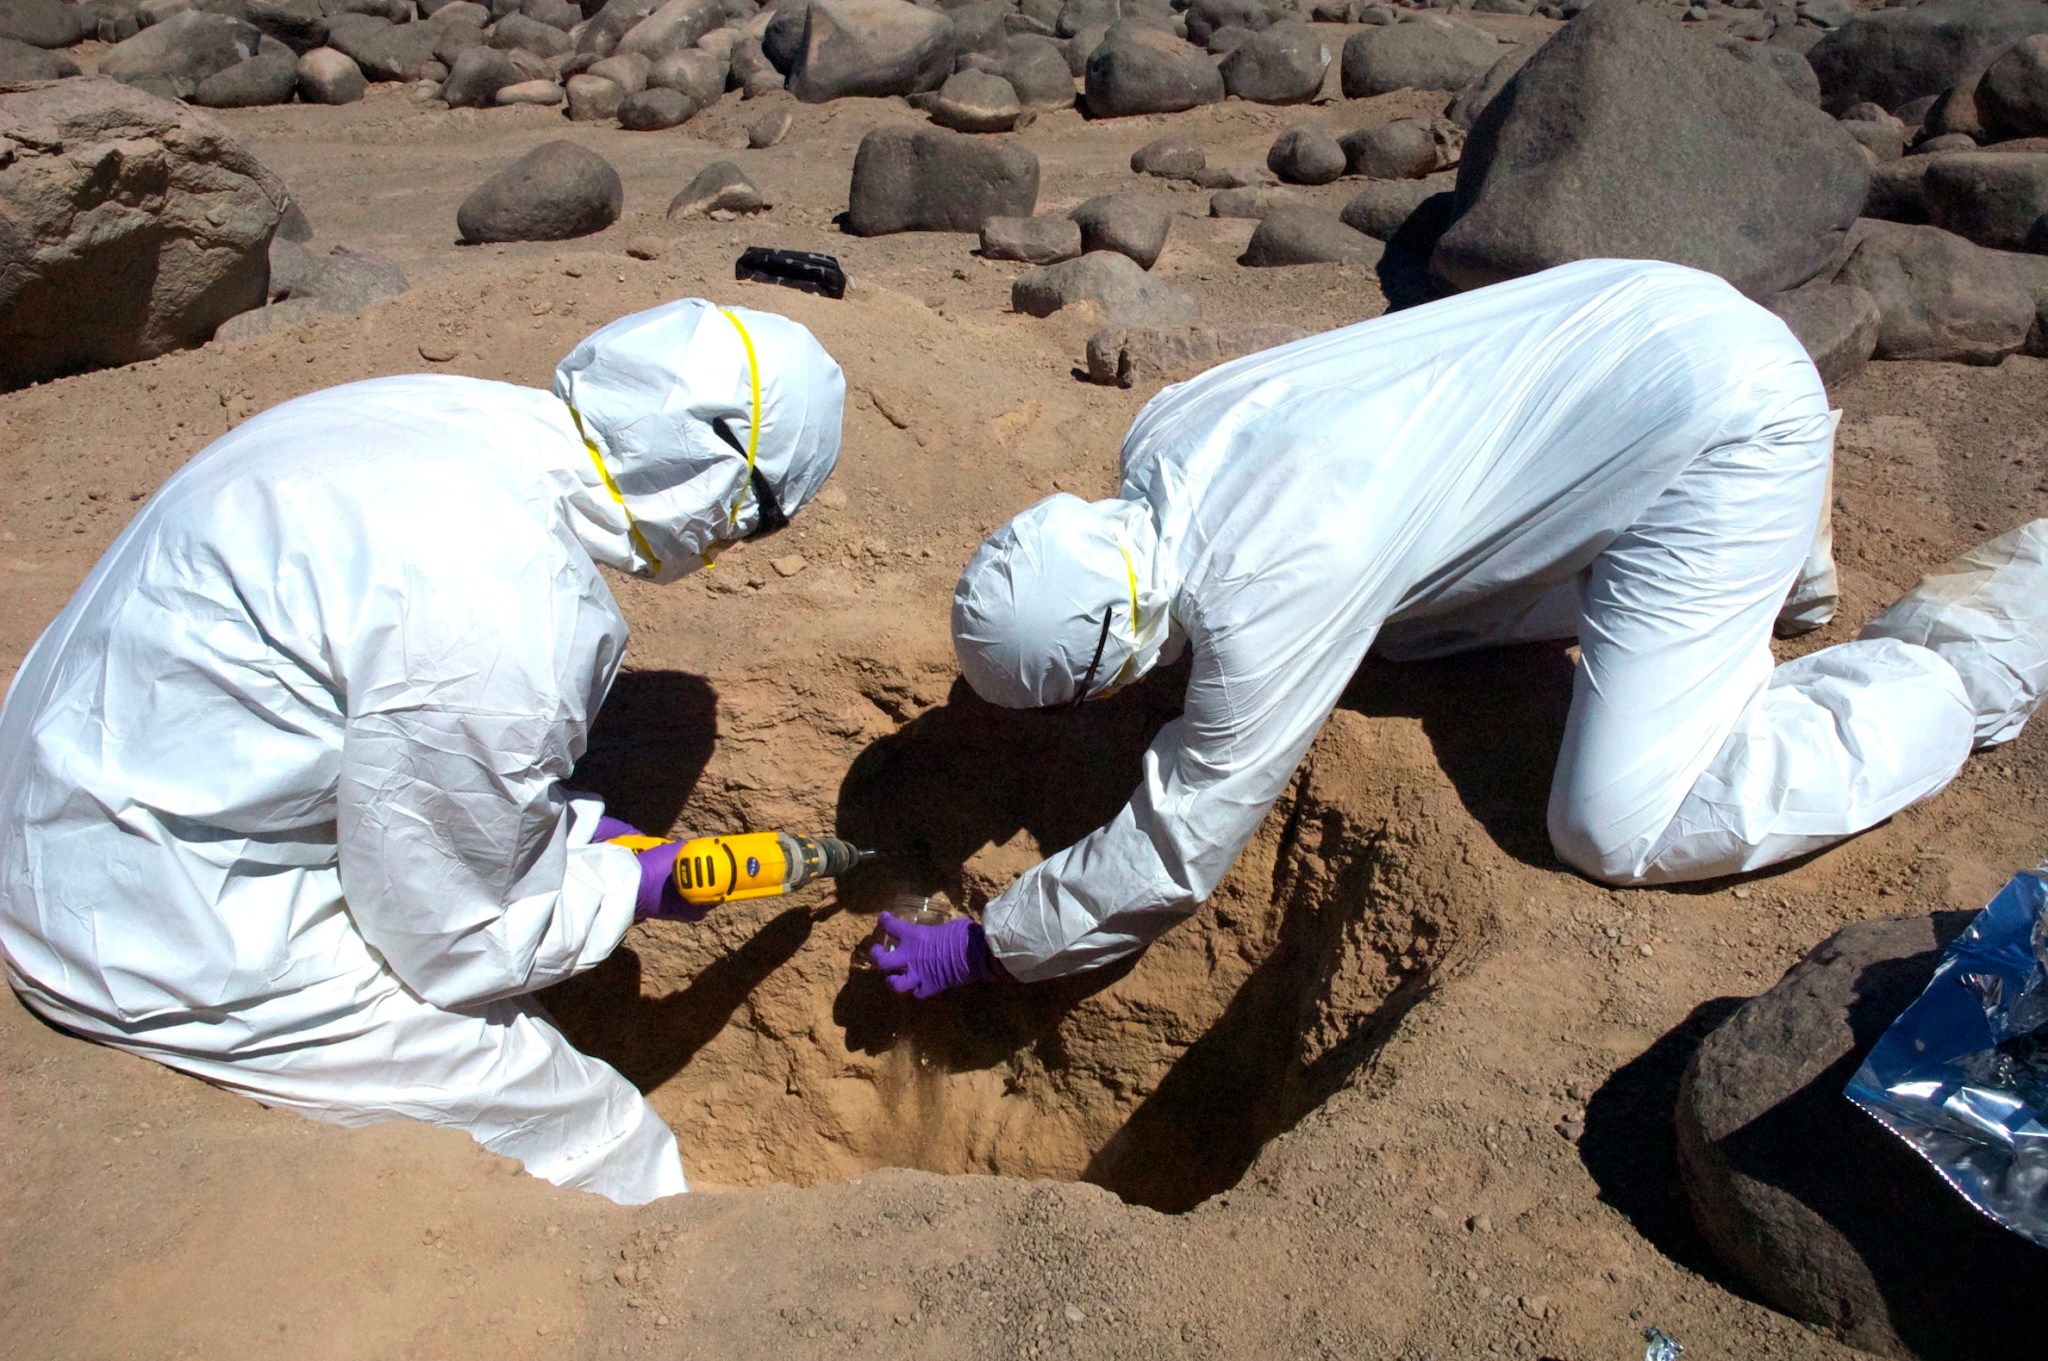 Two researchers collecting samples from a hole in the ground in the Atacama Desert using a drill.